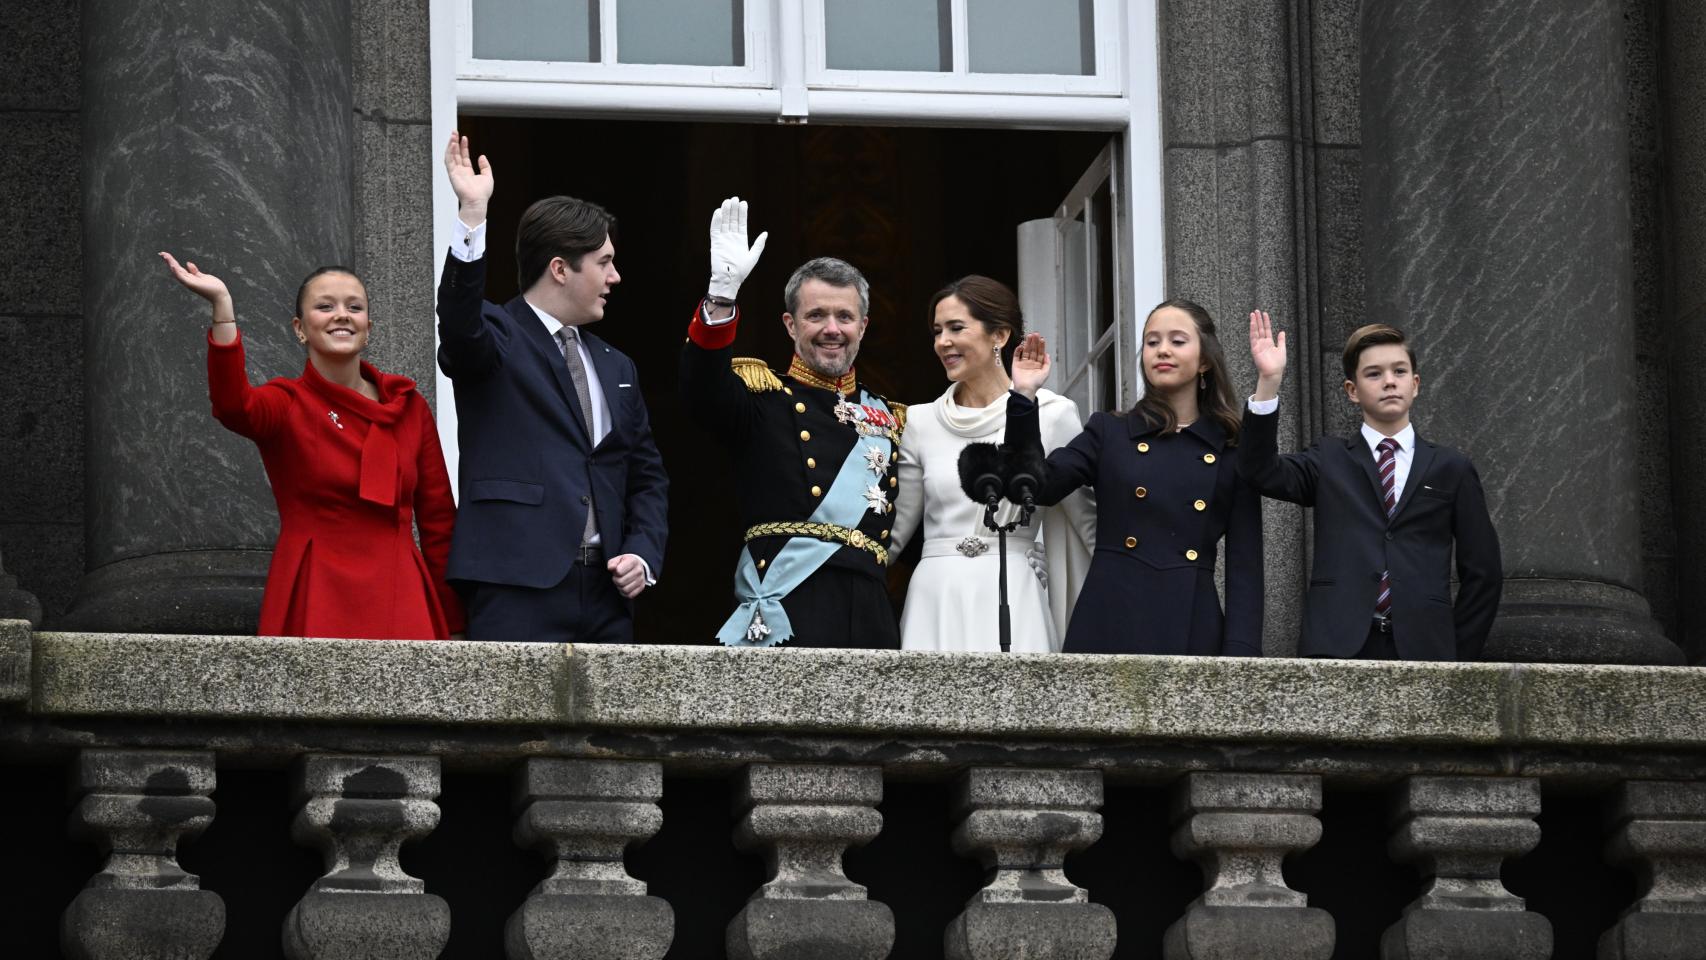 The Danish royal family welcomes its followers.